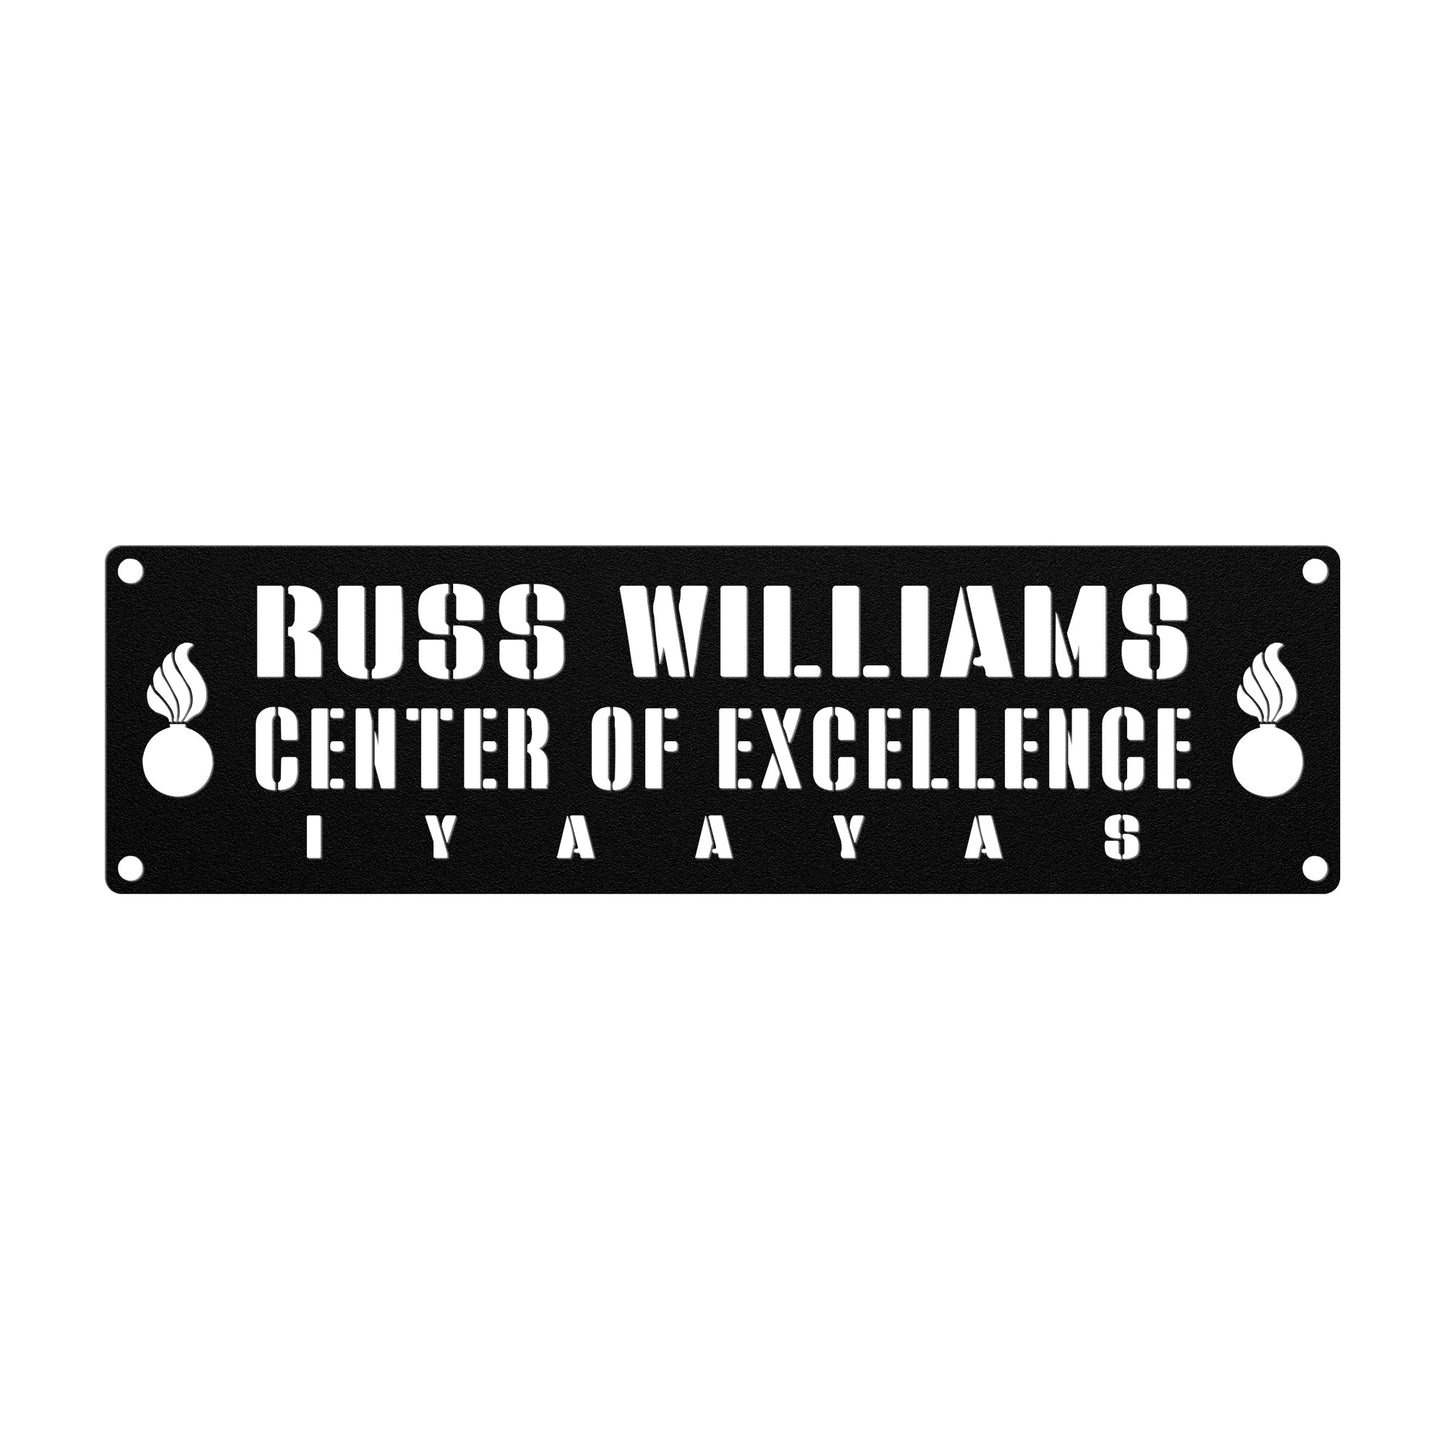 Russ Williams Center of Excellence  Die Cut Hanging Metal Wall Sign